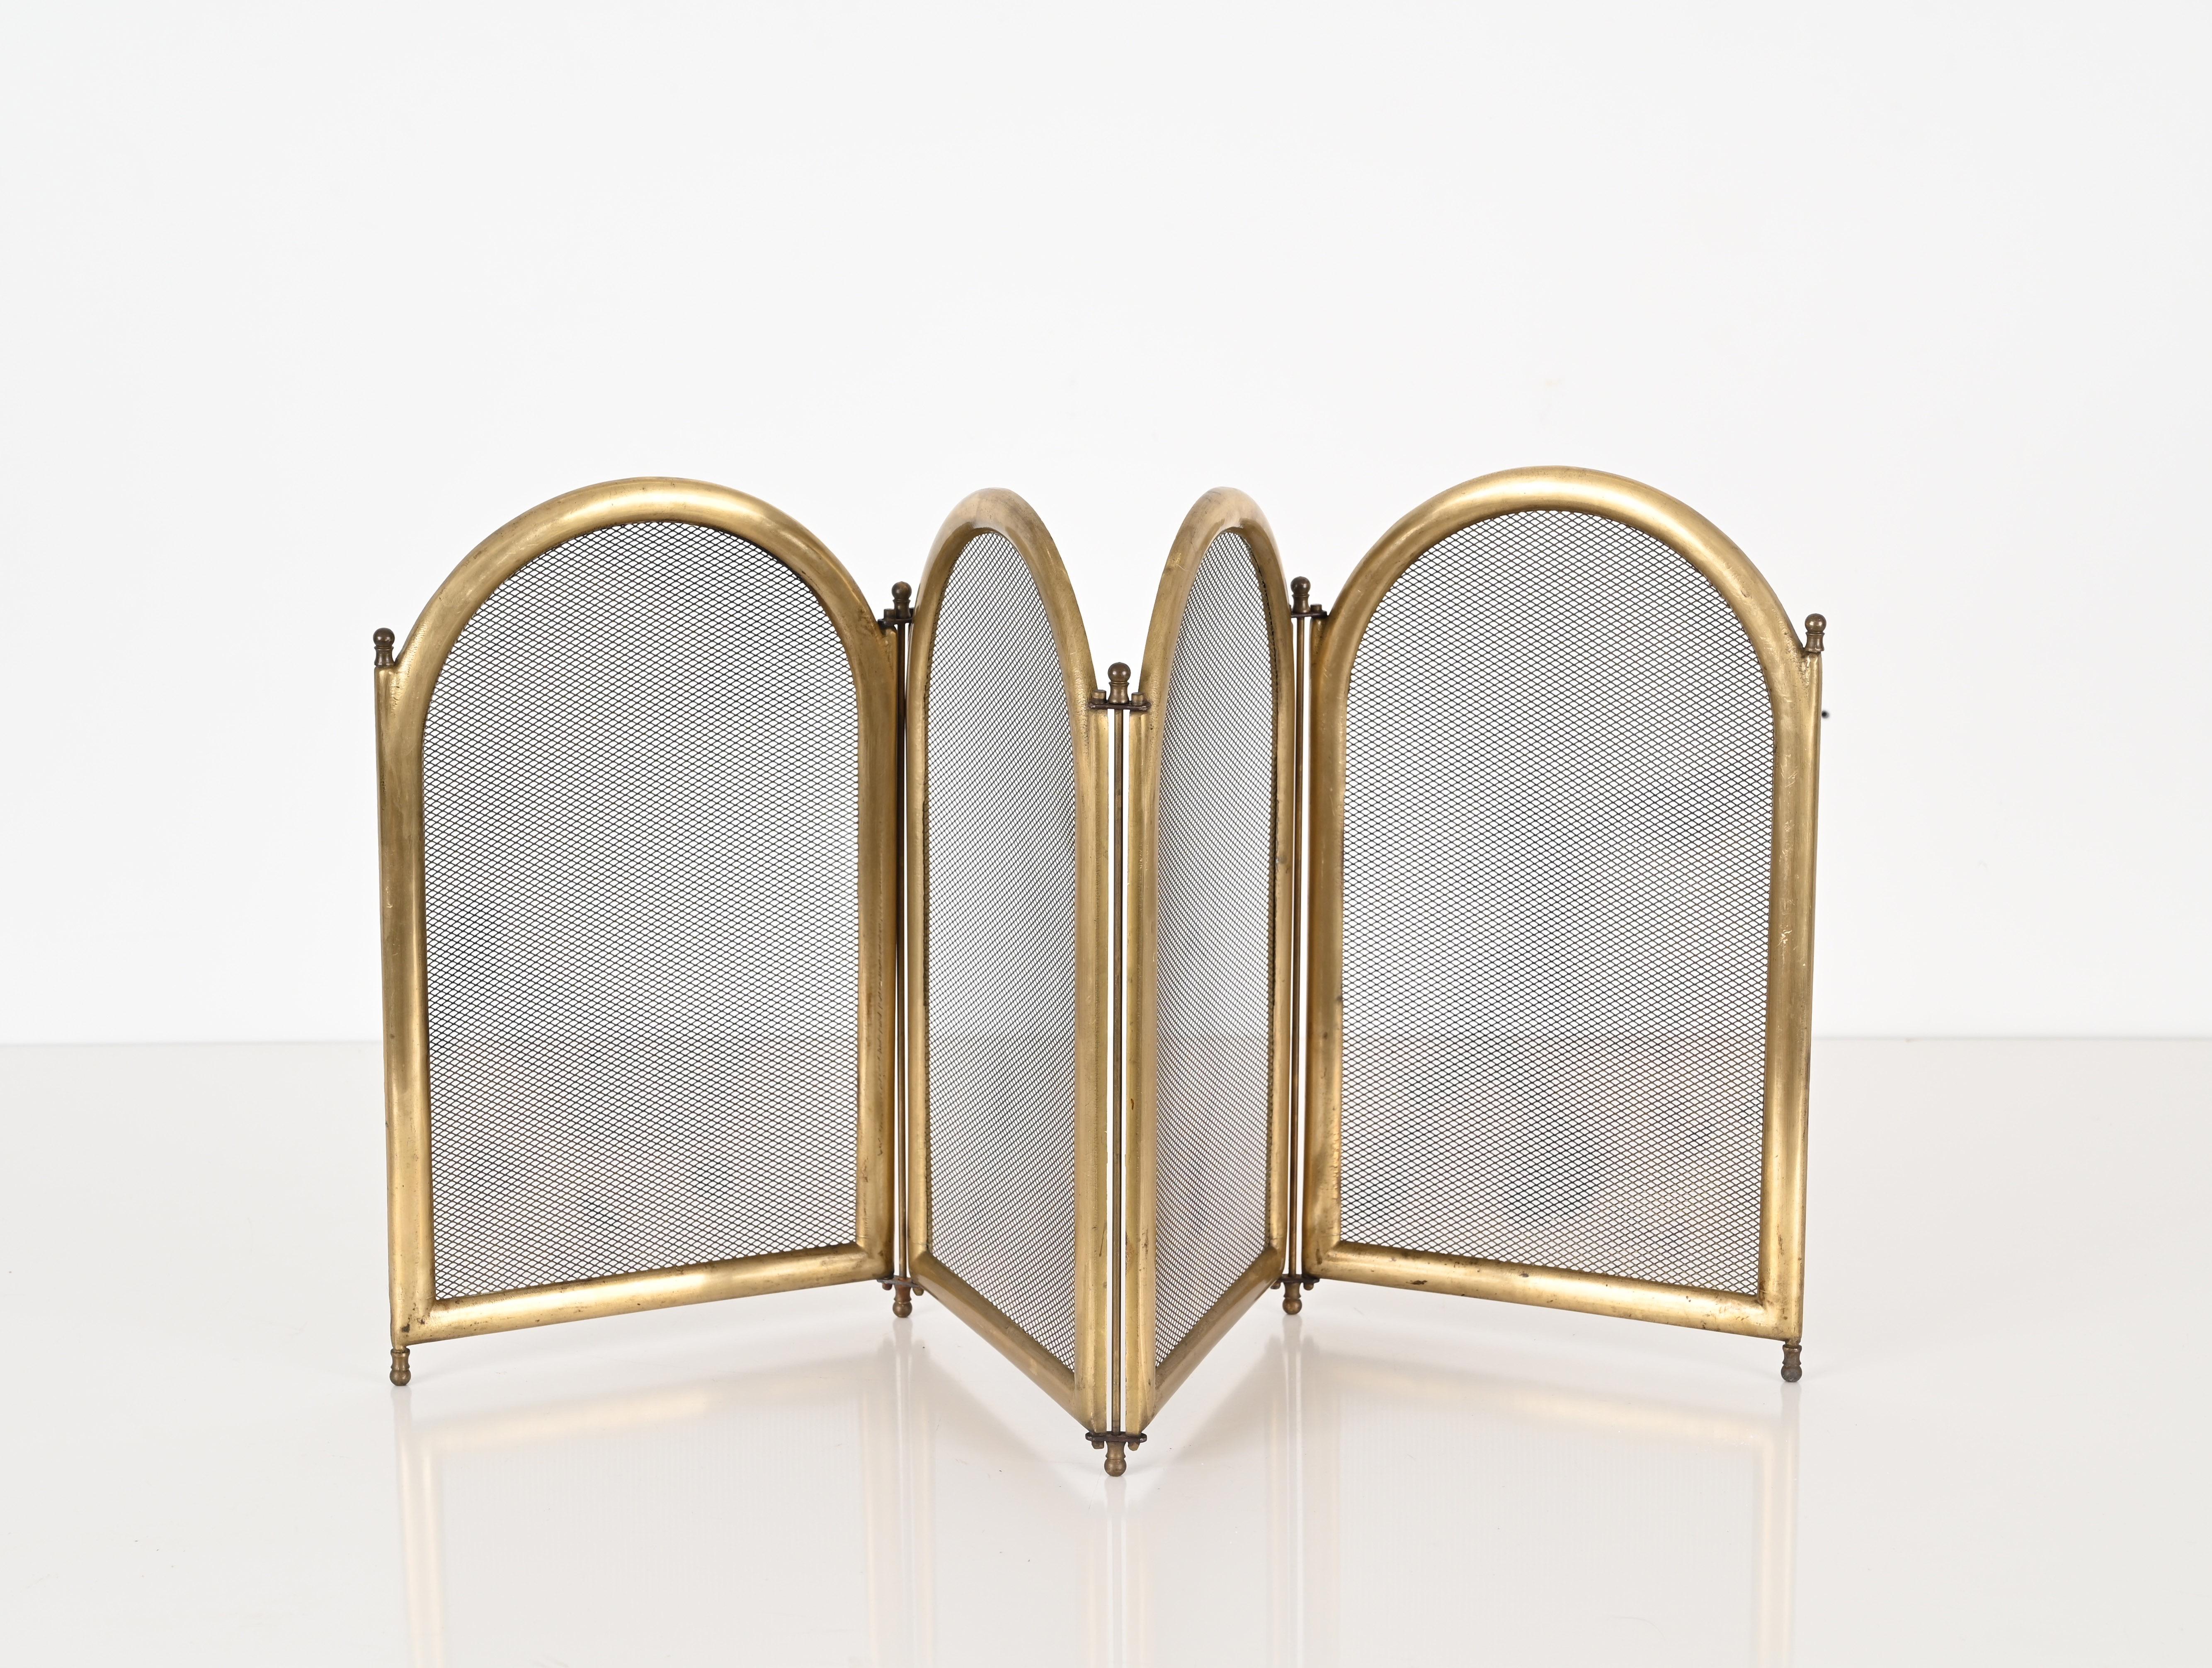 Beautiful Italian folding fire guard made in solid brass. This lovely item was made in Italy during the 1960s.

This elegant fire screen has 4 folding arch shaped screens that can open and fold independently.

An elegant fire guard in solid brass,